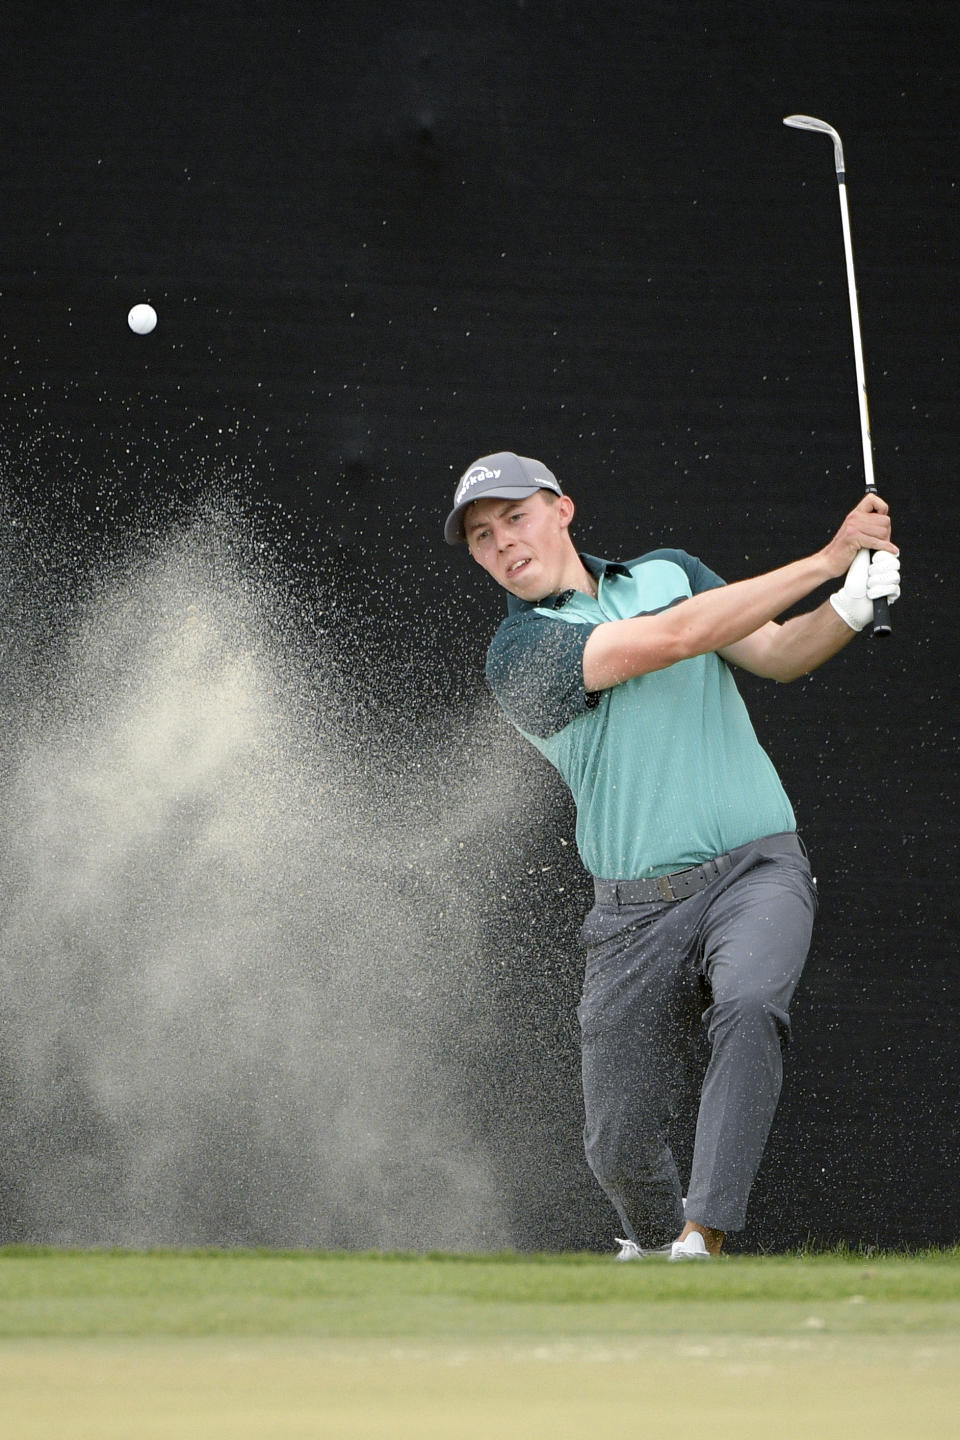 Matthew Fitzpatrick, of England, hits out of a bunker onto the 17th green during the third round of the Arnold Palmer Invitational golf tournament Saturday, March 9, 2019, in Orlando, Fla. (AP Photo/Phelan M. Ebenhack)